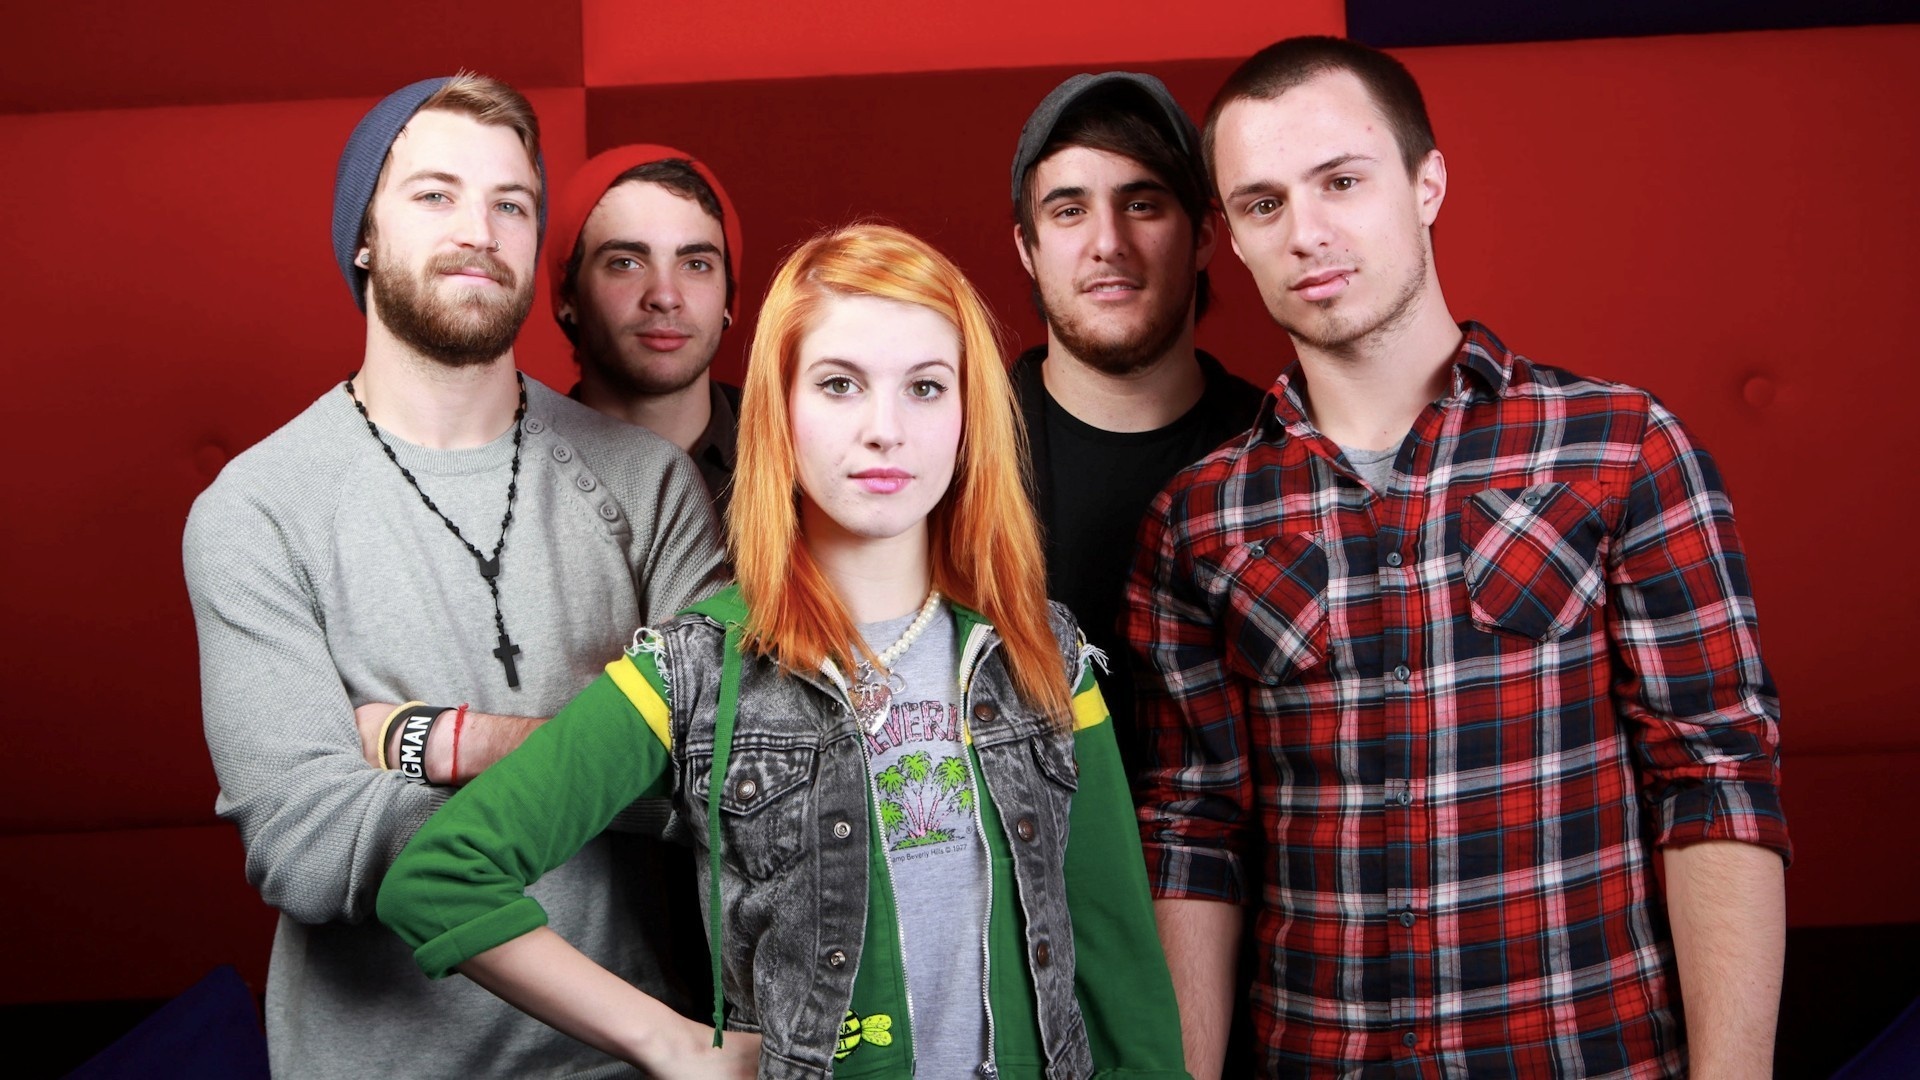 Paramore: The hit single “Ain't It Fun”, The first-ever Grammy Award. 1920x1080 Full HD Background.